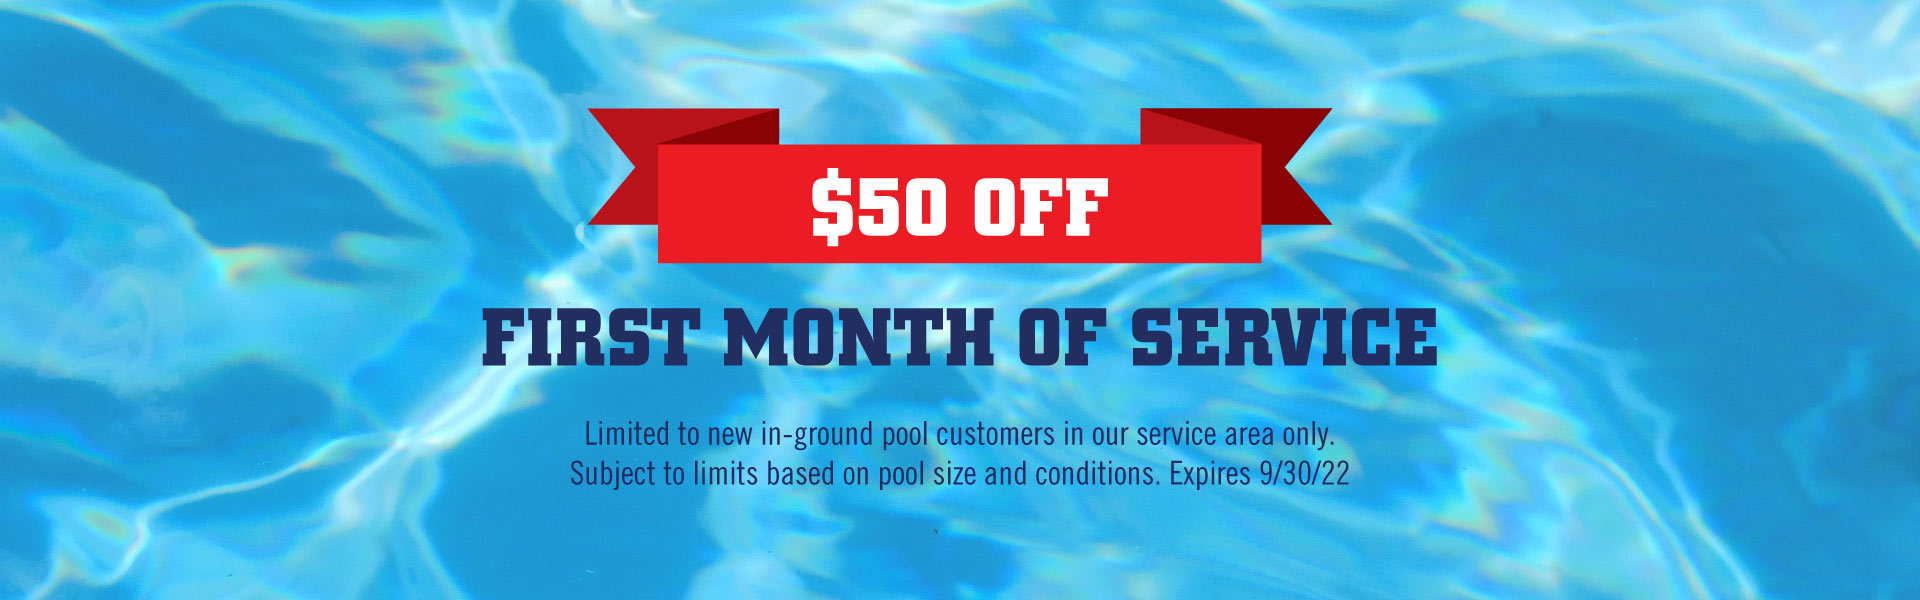 Promotion highlighting $50 off first month of pool service